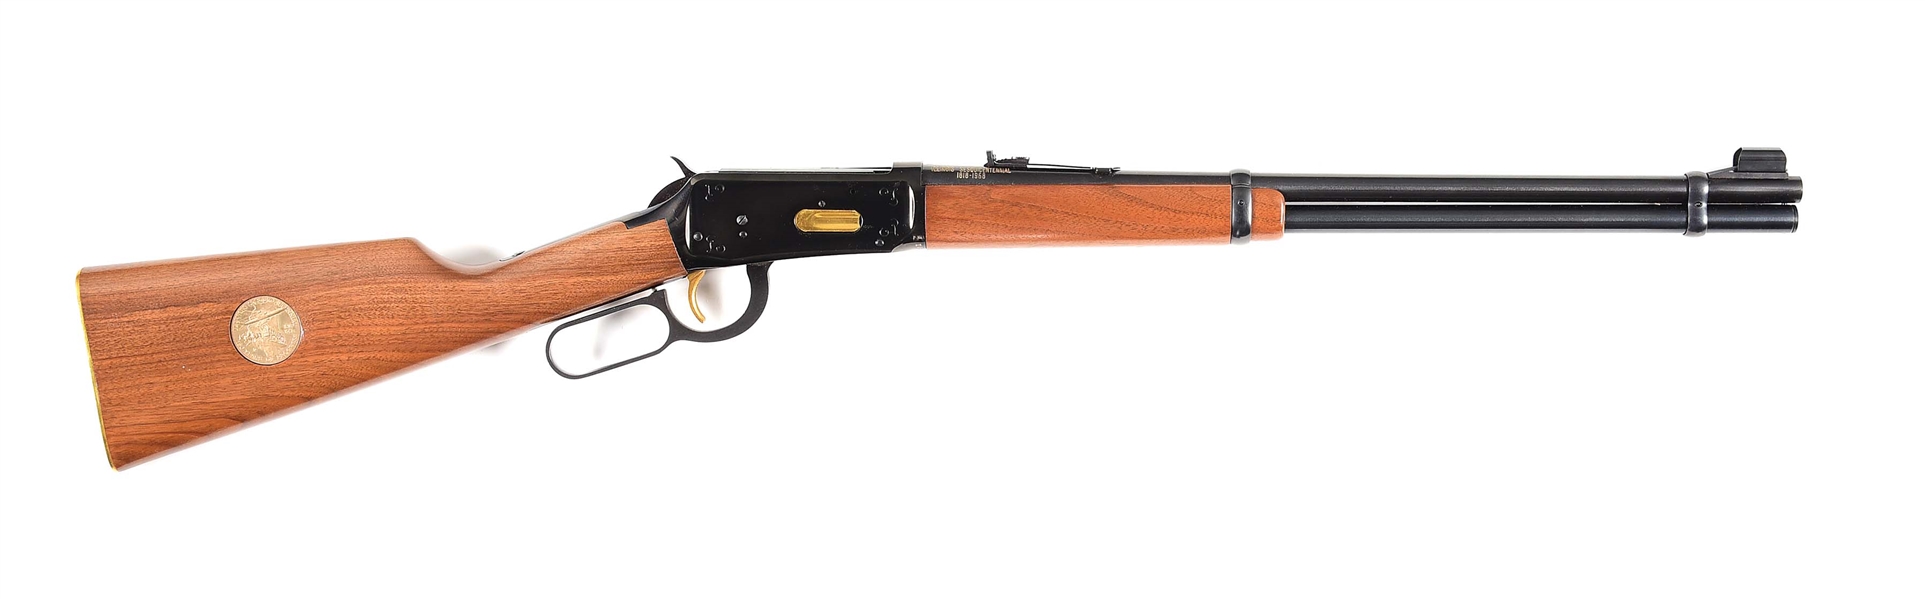 (M) WINCHESTER 94 ILLINOIS SESQUICENTENNIAL LEVER ACTION CARBINE.